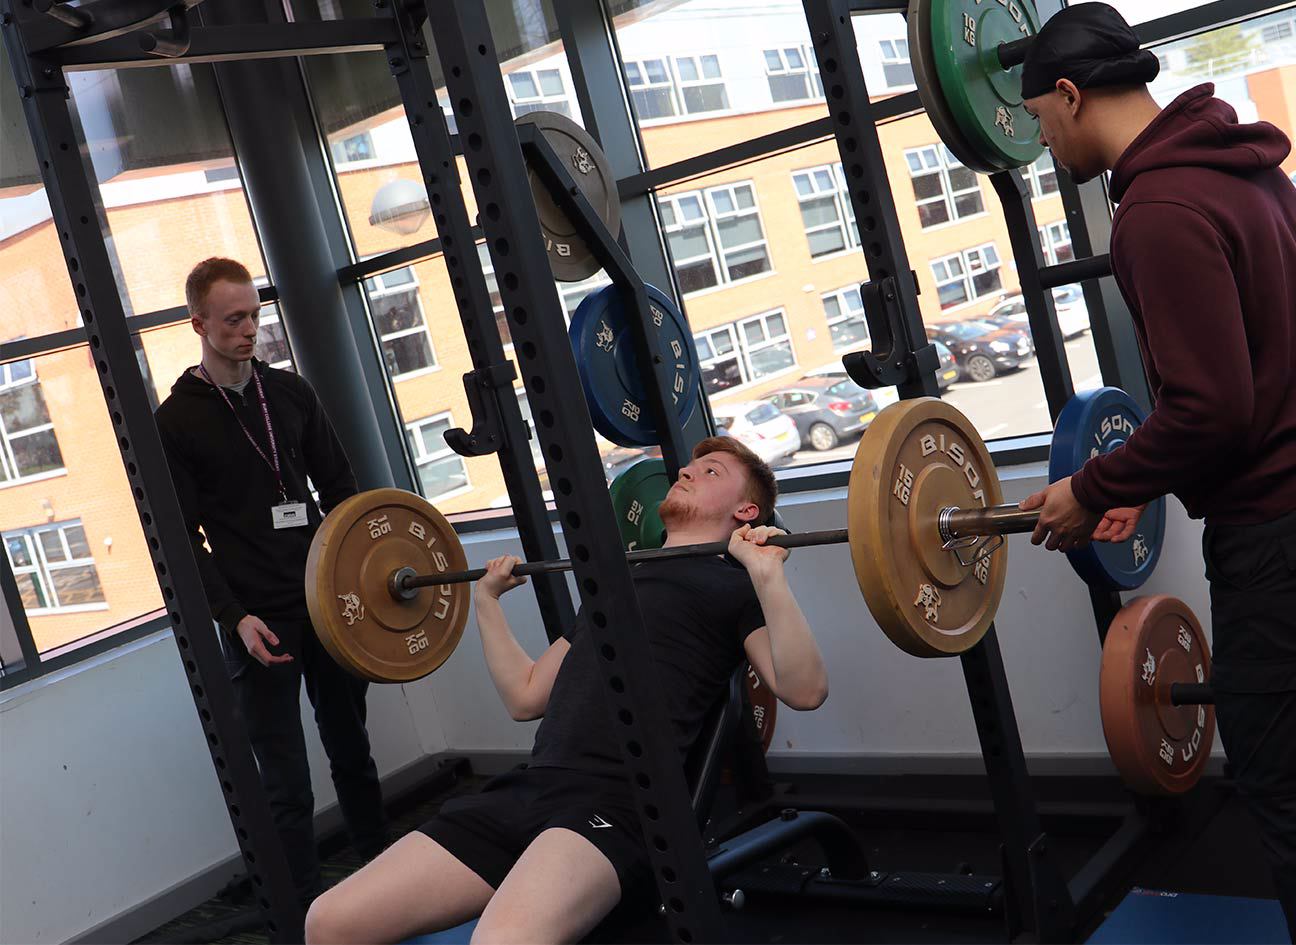 Student using the bench-press machine in the gym